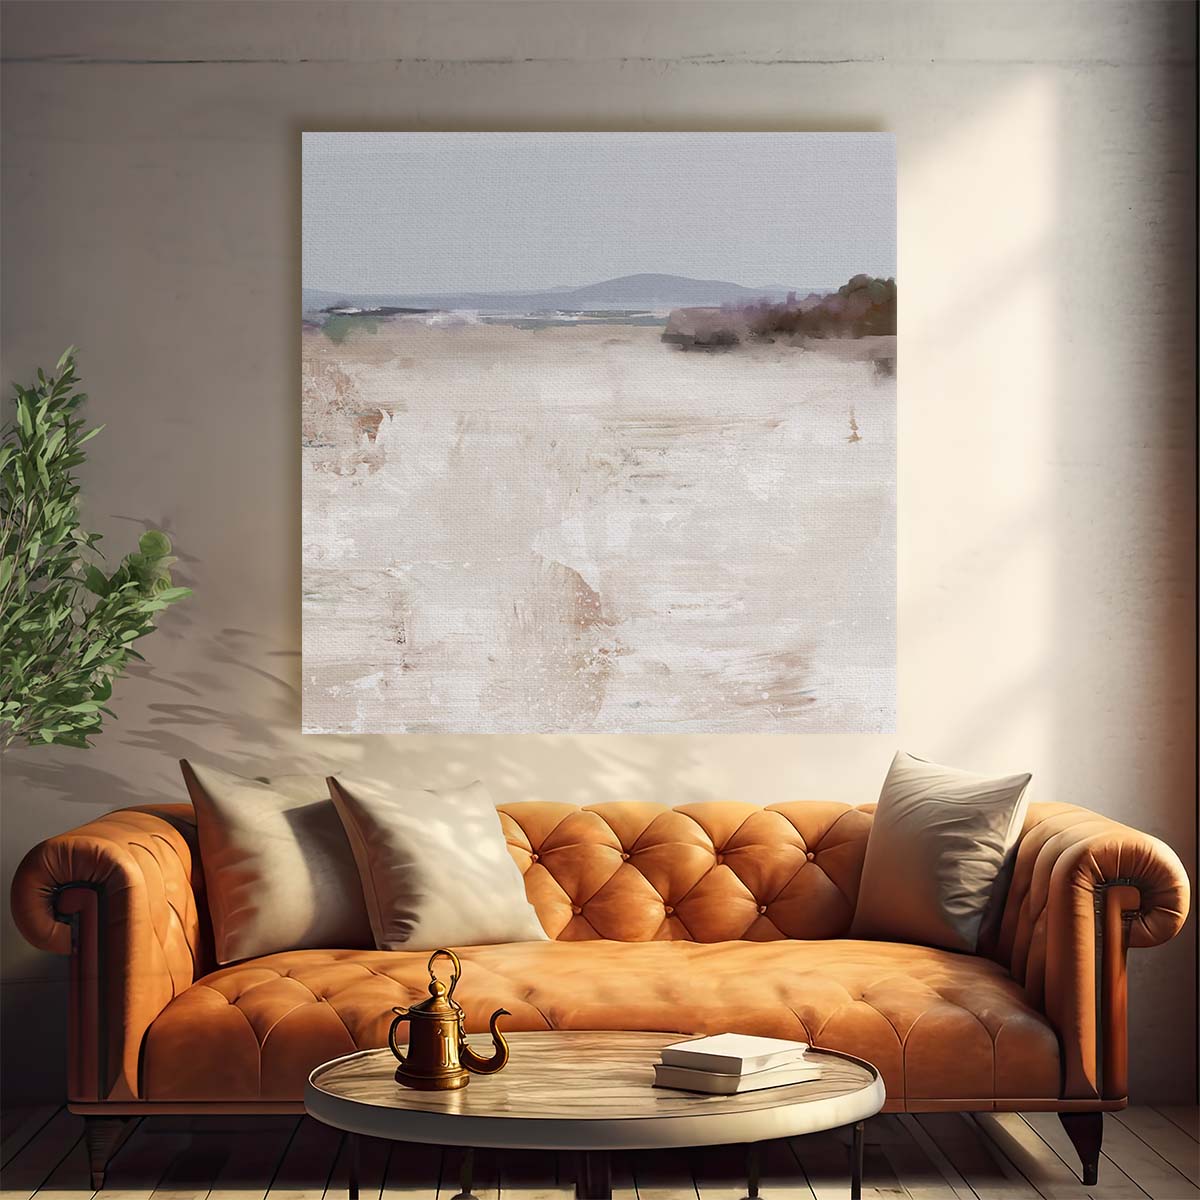 Modern Abstract Mountain Landscape Wall Art by Dan Hobday by Luxuriance Designs. Made in USA.